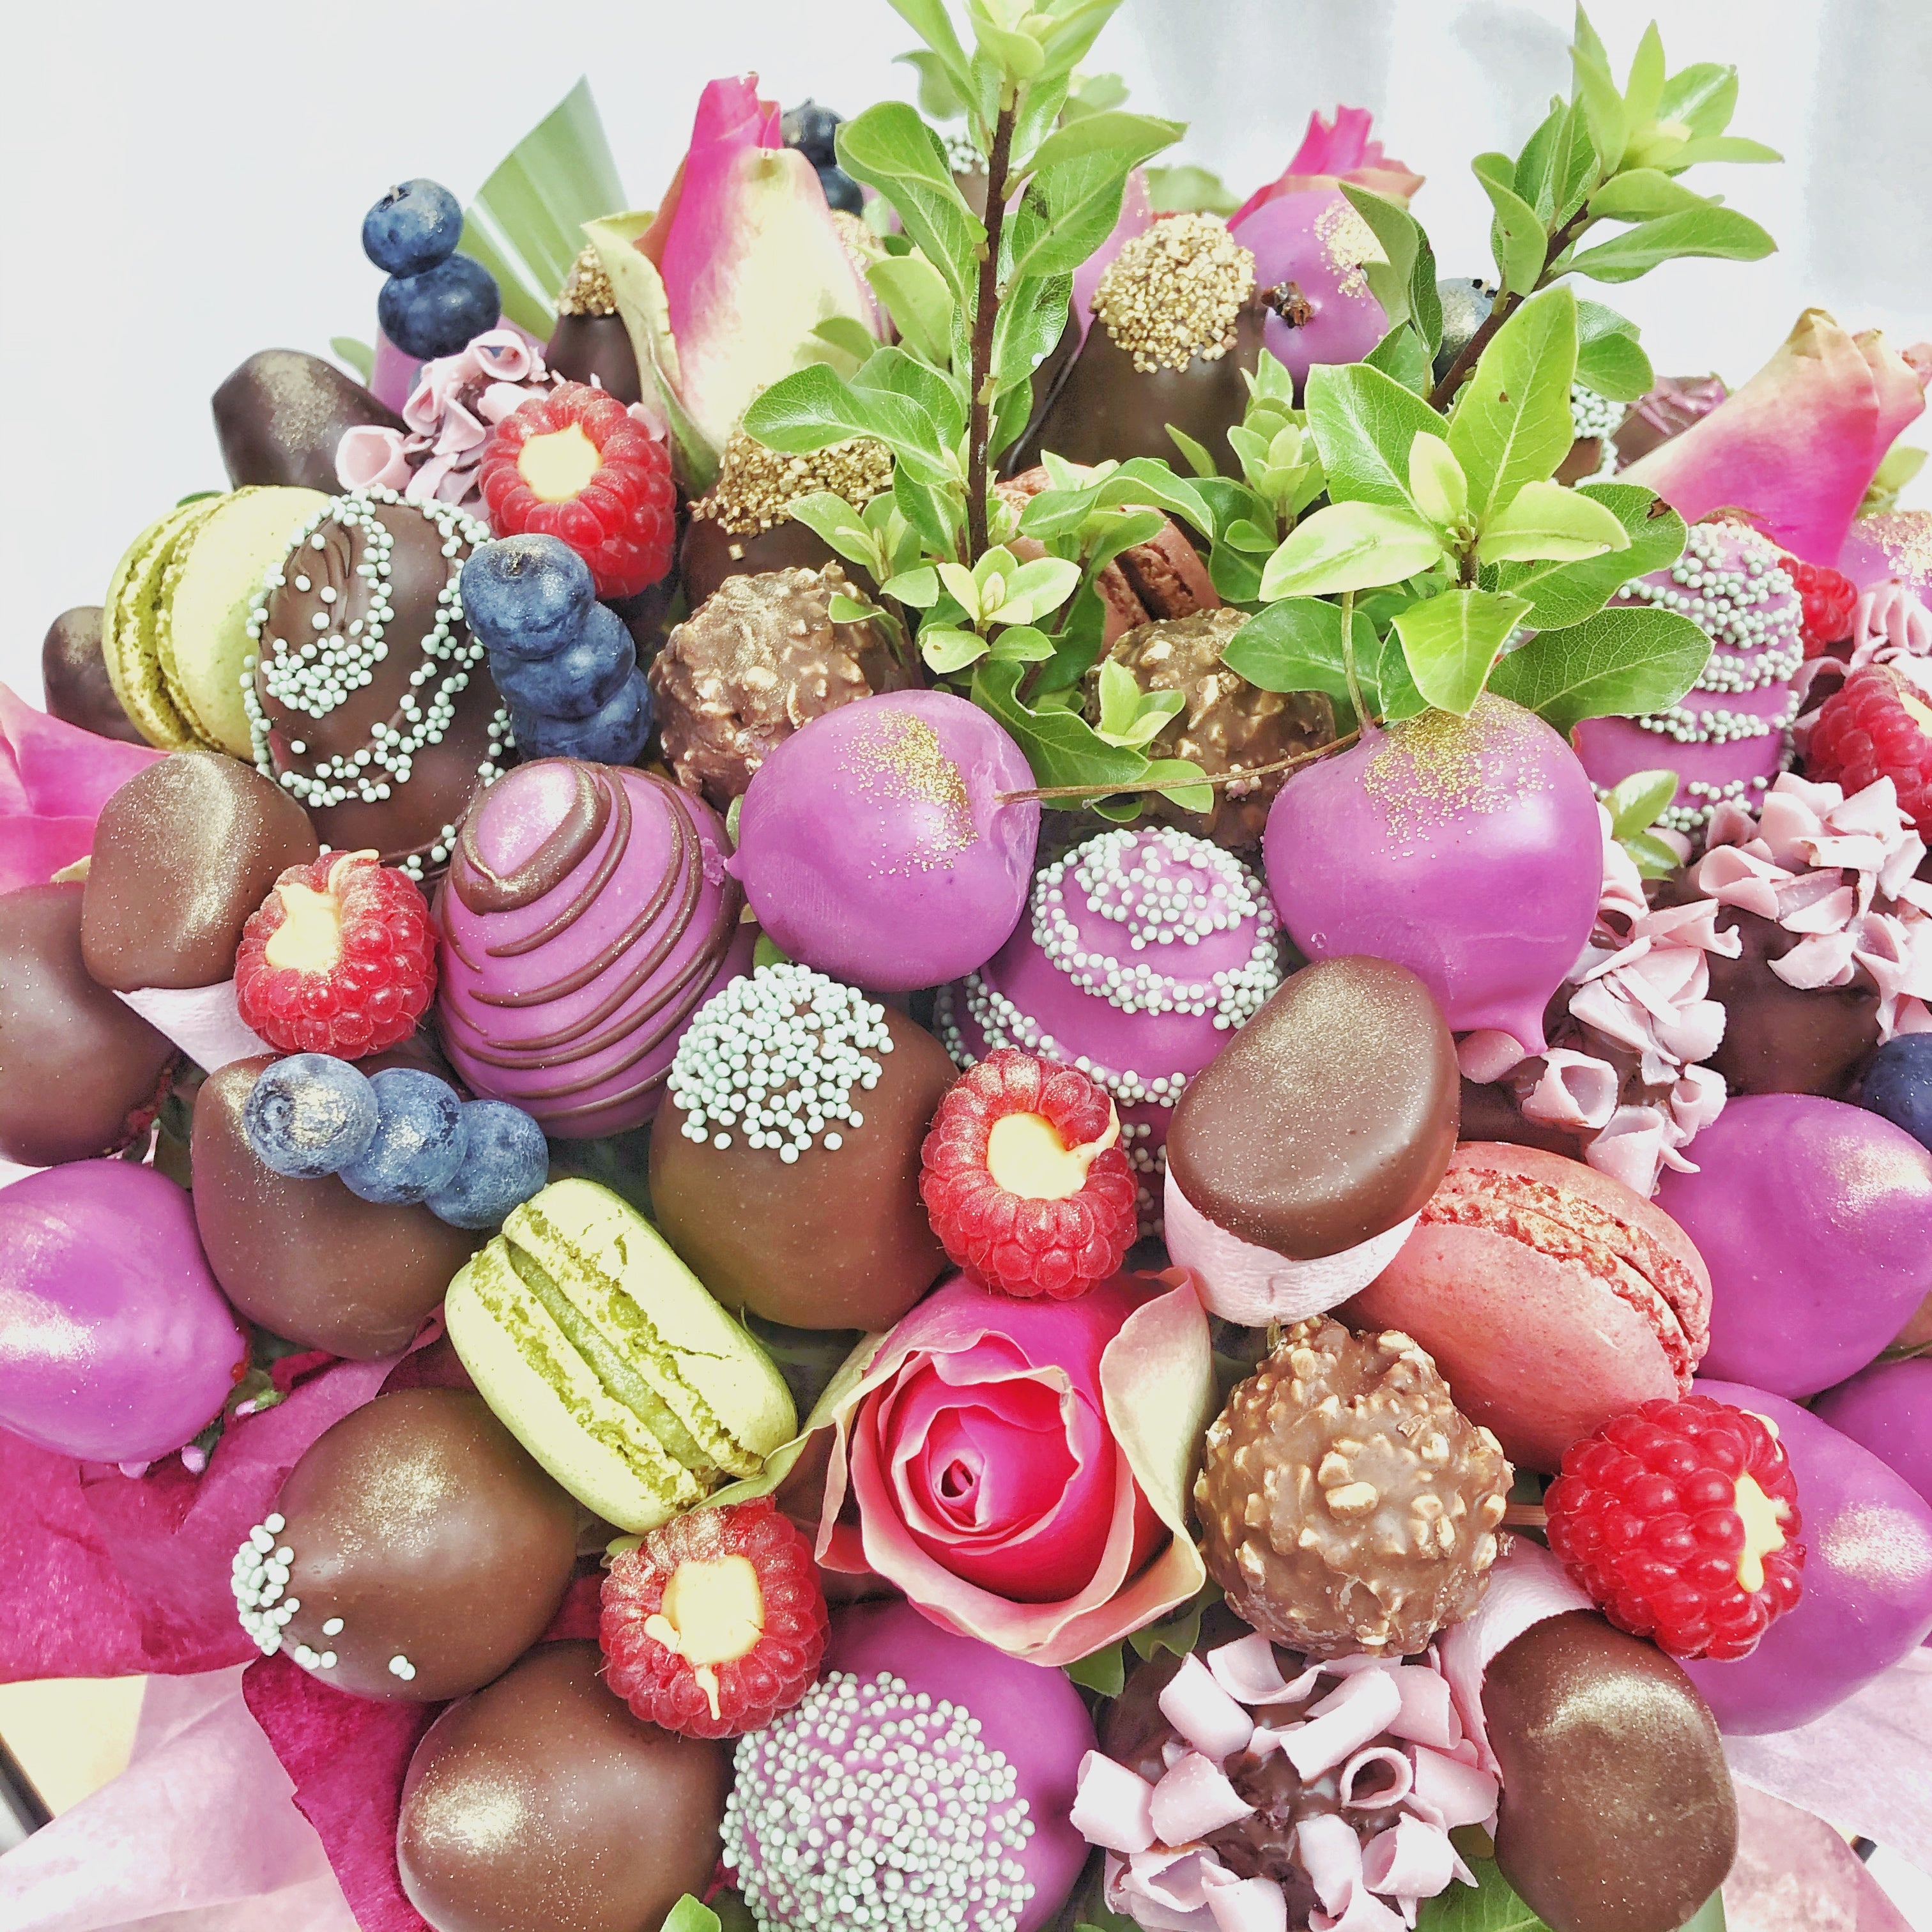 "Allure" Chocolate Blooms Edible bouquet romantic gift milk chocolate blooms Bouquet chocolate covered strawberries and flowers delivery 